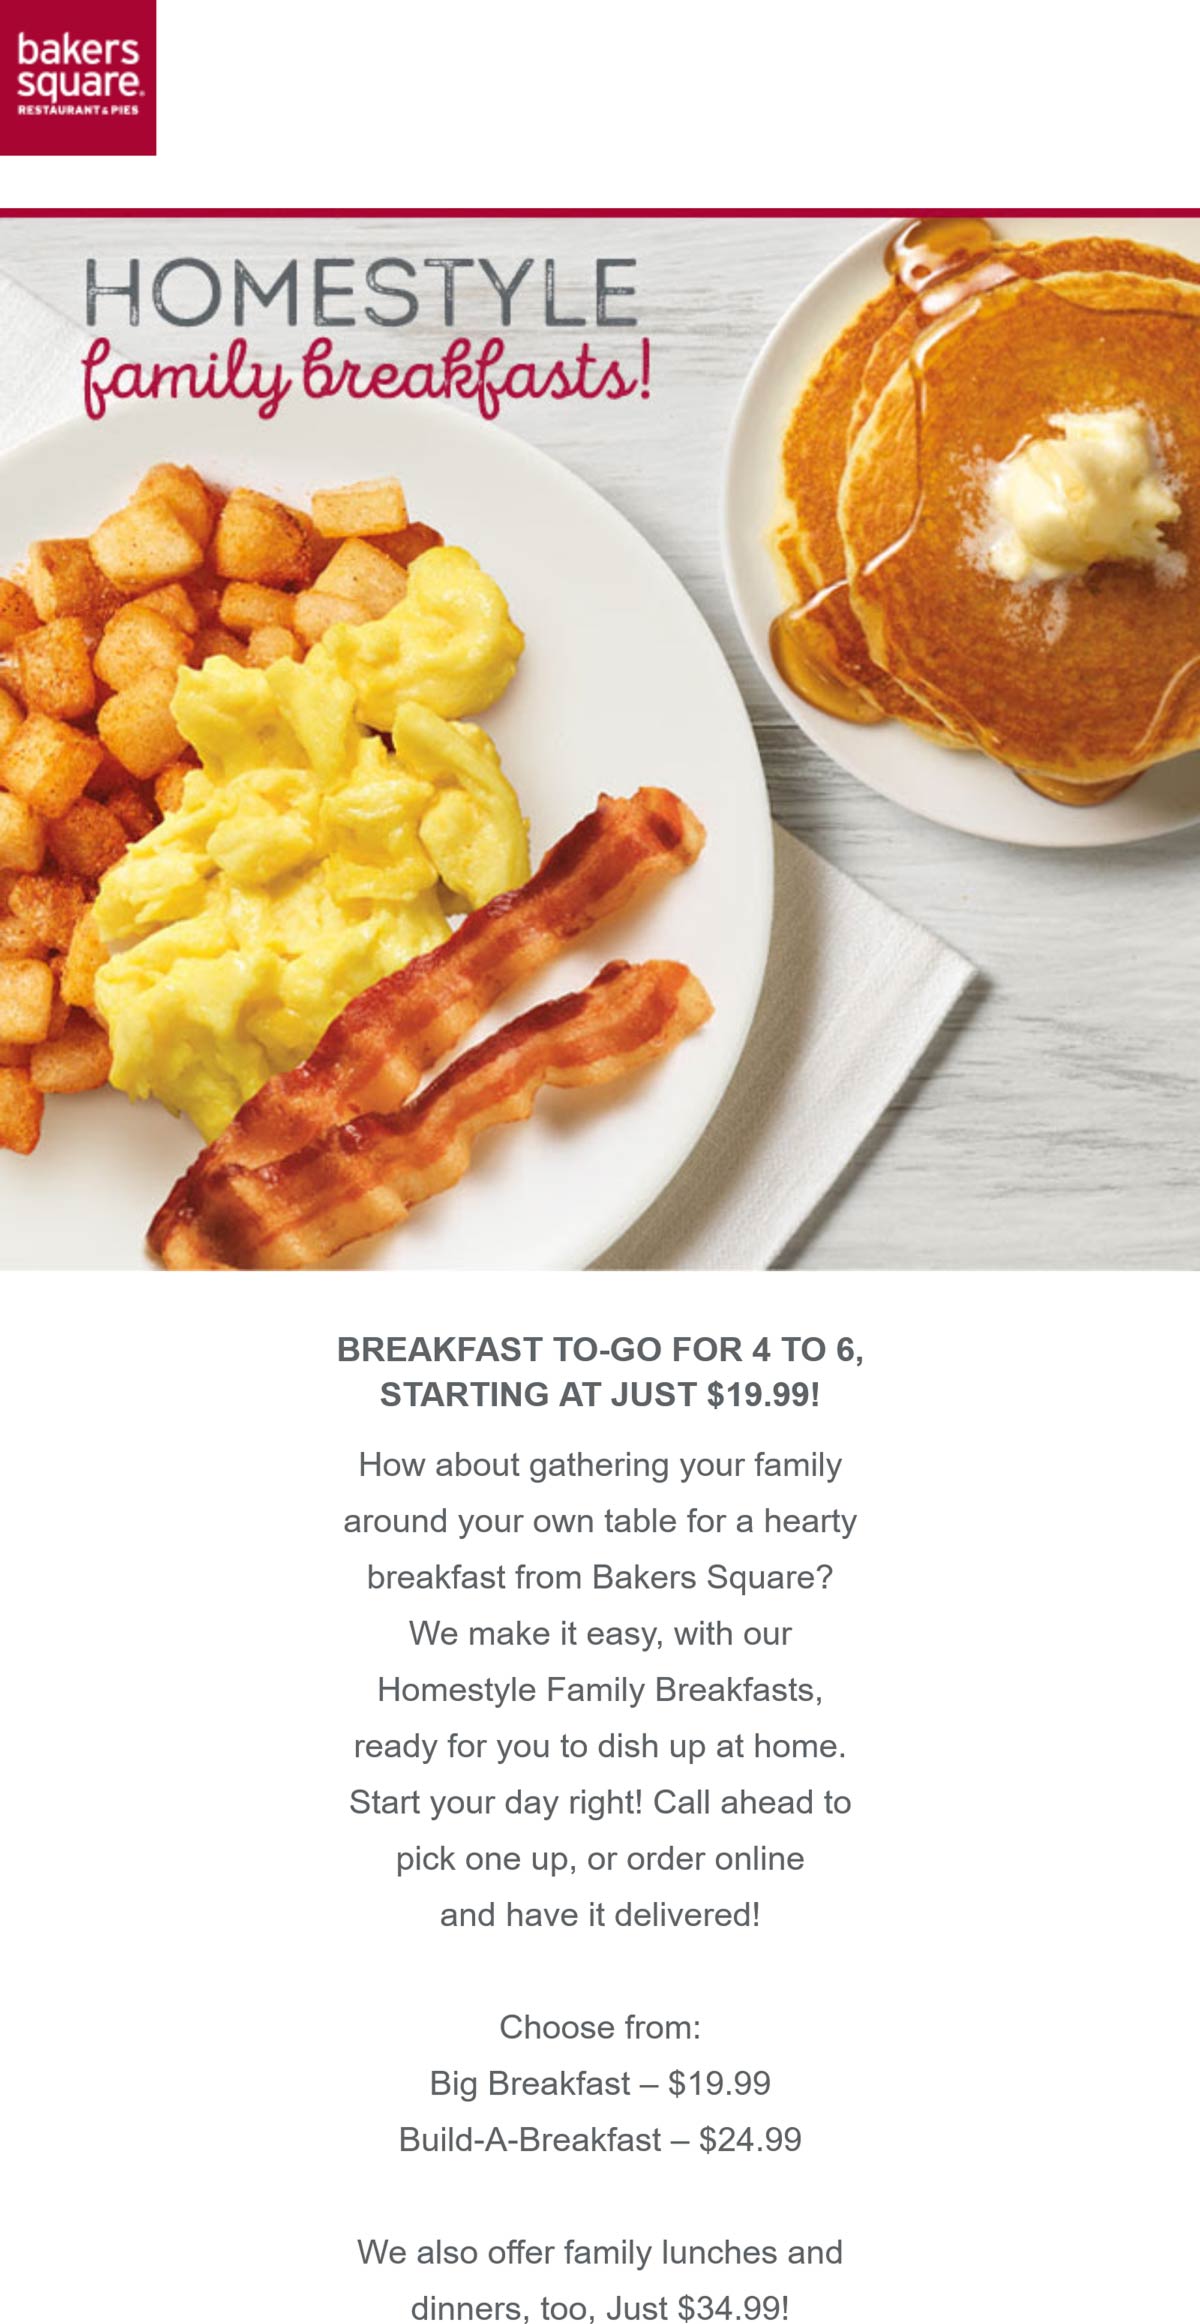 Bakers Square restaurants Coupon  Breakfast for 4 delivered starting $20 at Bakers Square #bakerssquare 